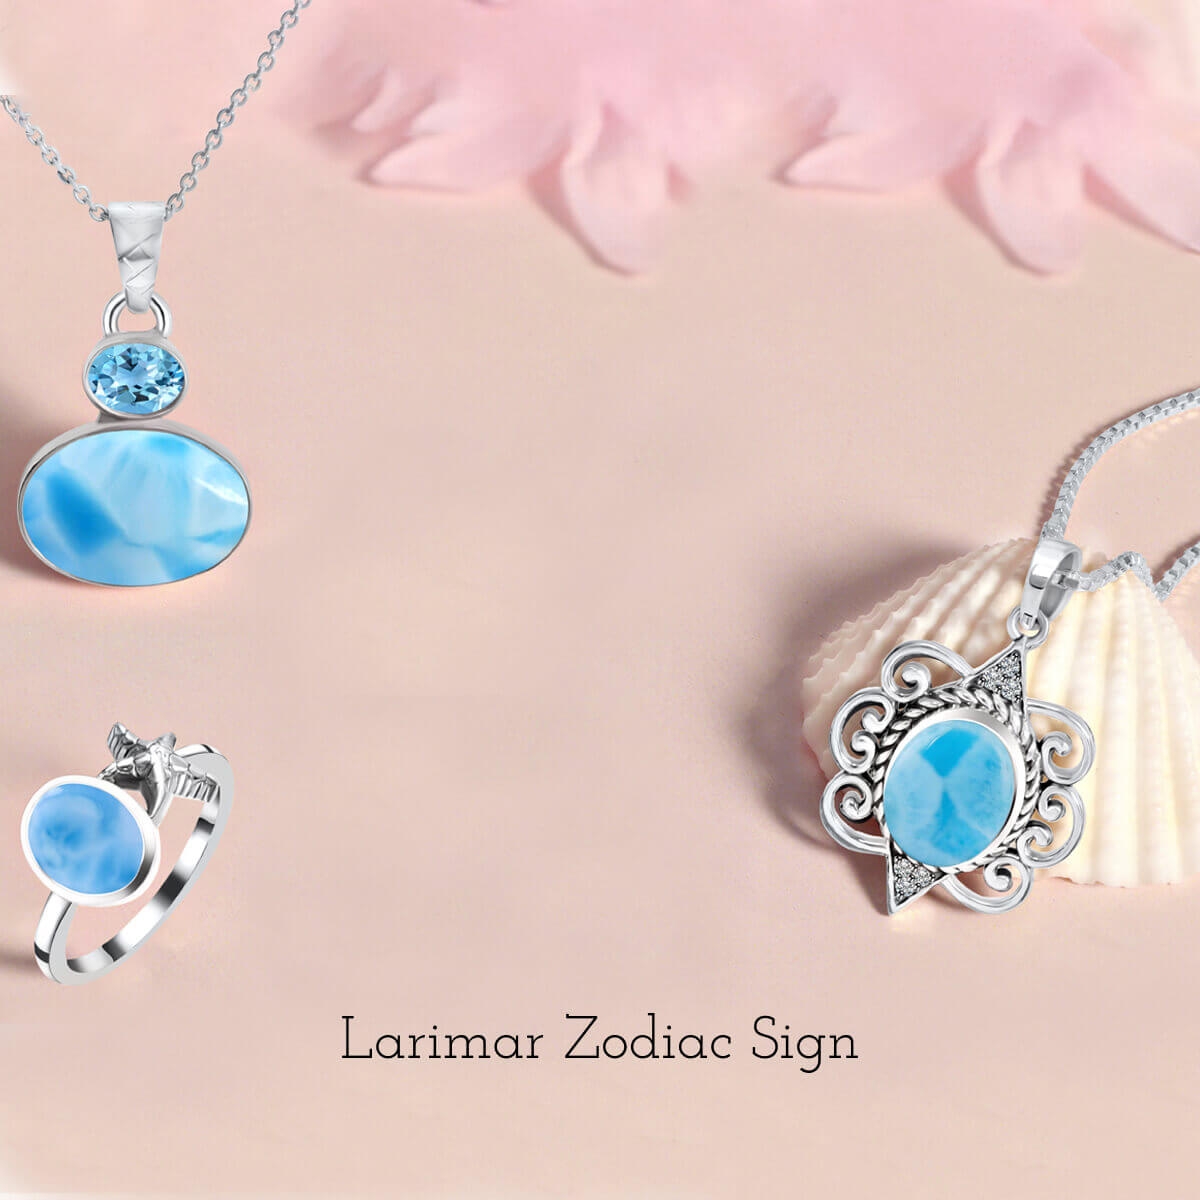 Zodiac sign associated with Larimar